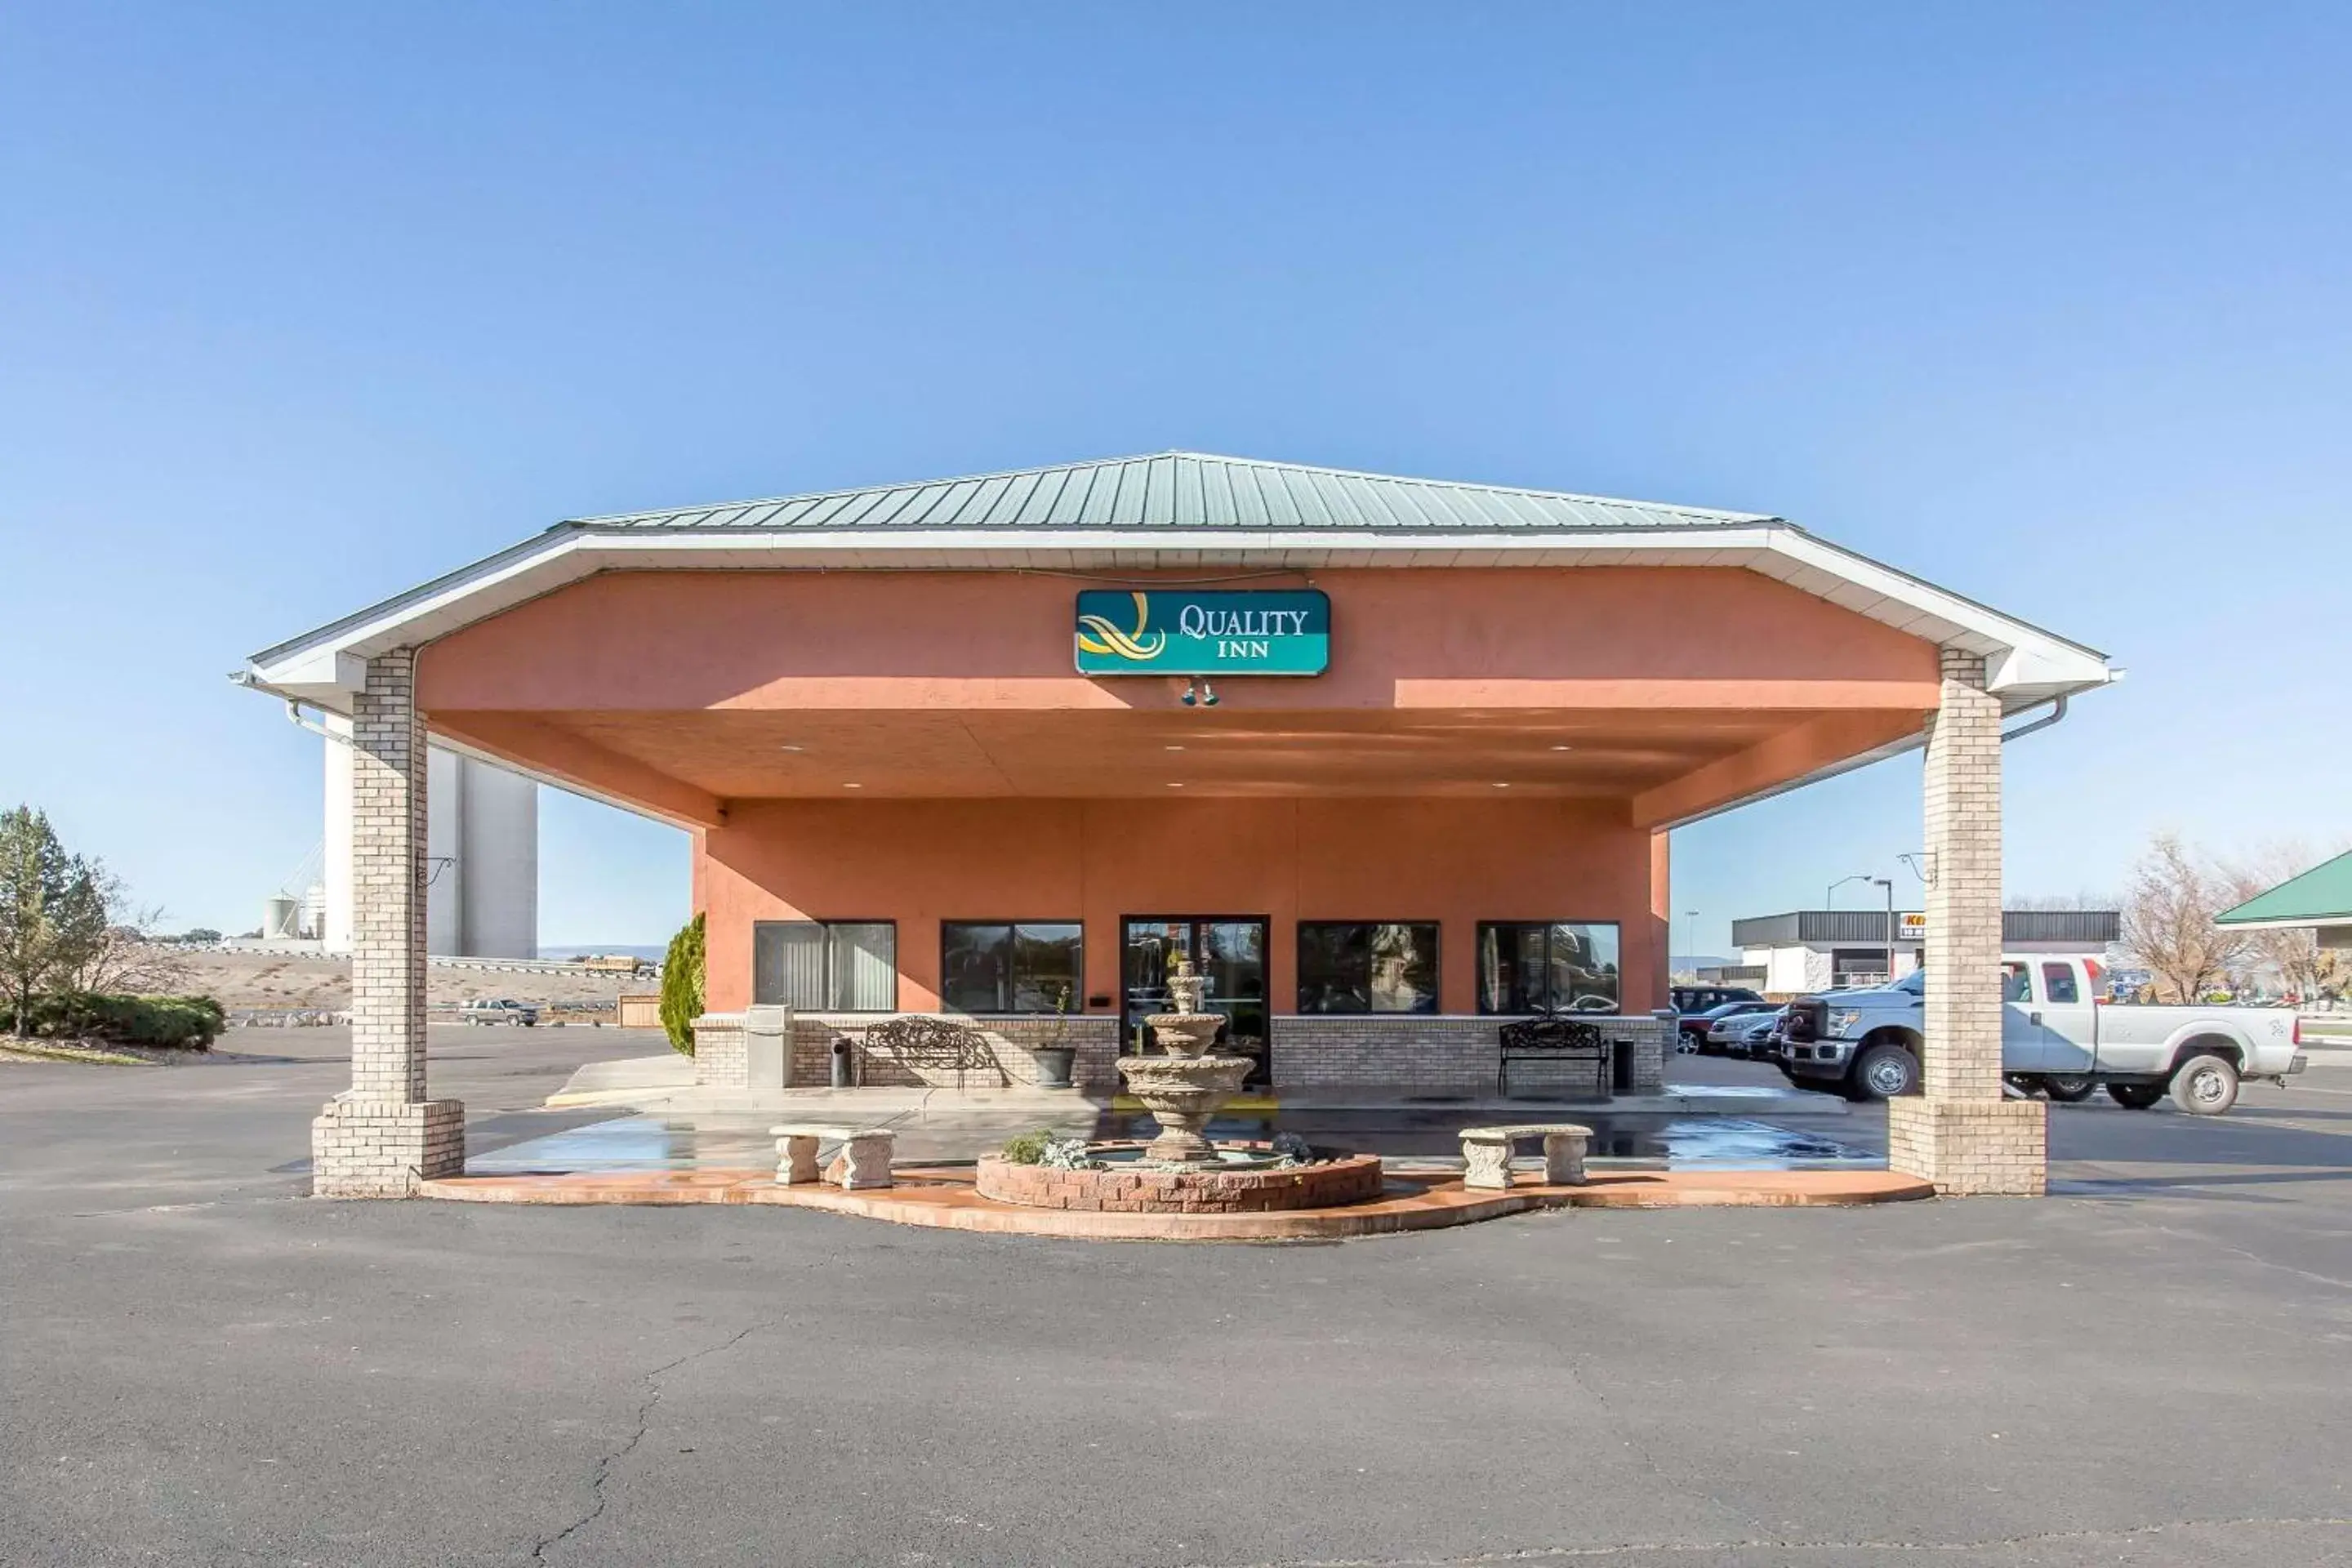 Property building in Quality Inn Delta Gateway to Rocky Mountains